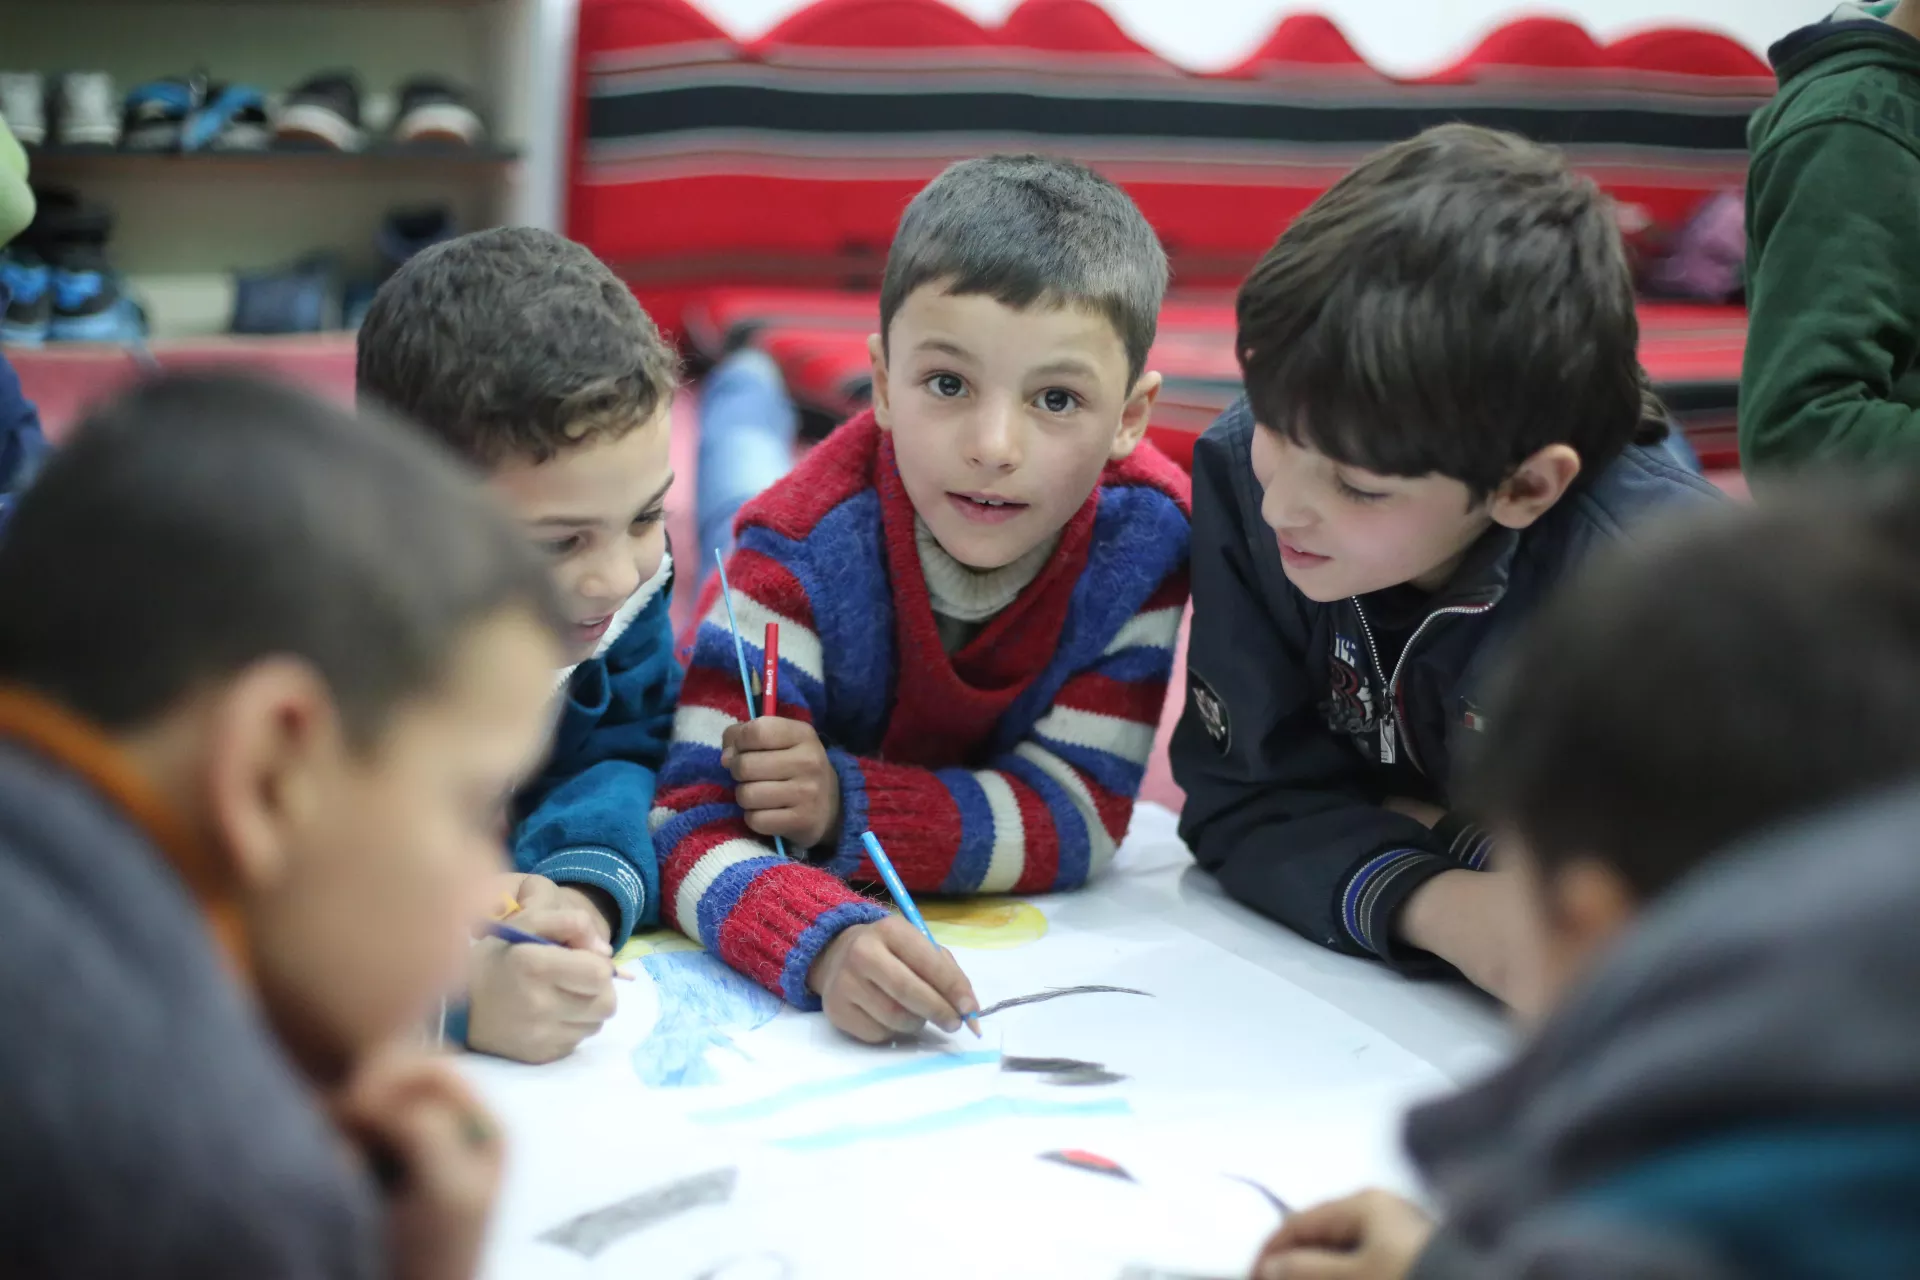 Young boys attend a basement school in besieged East Ghouta and are drawing on a table